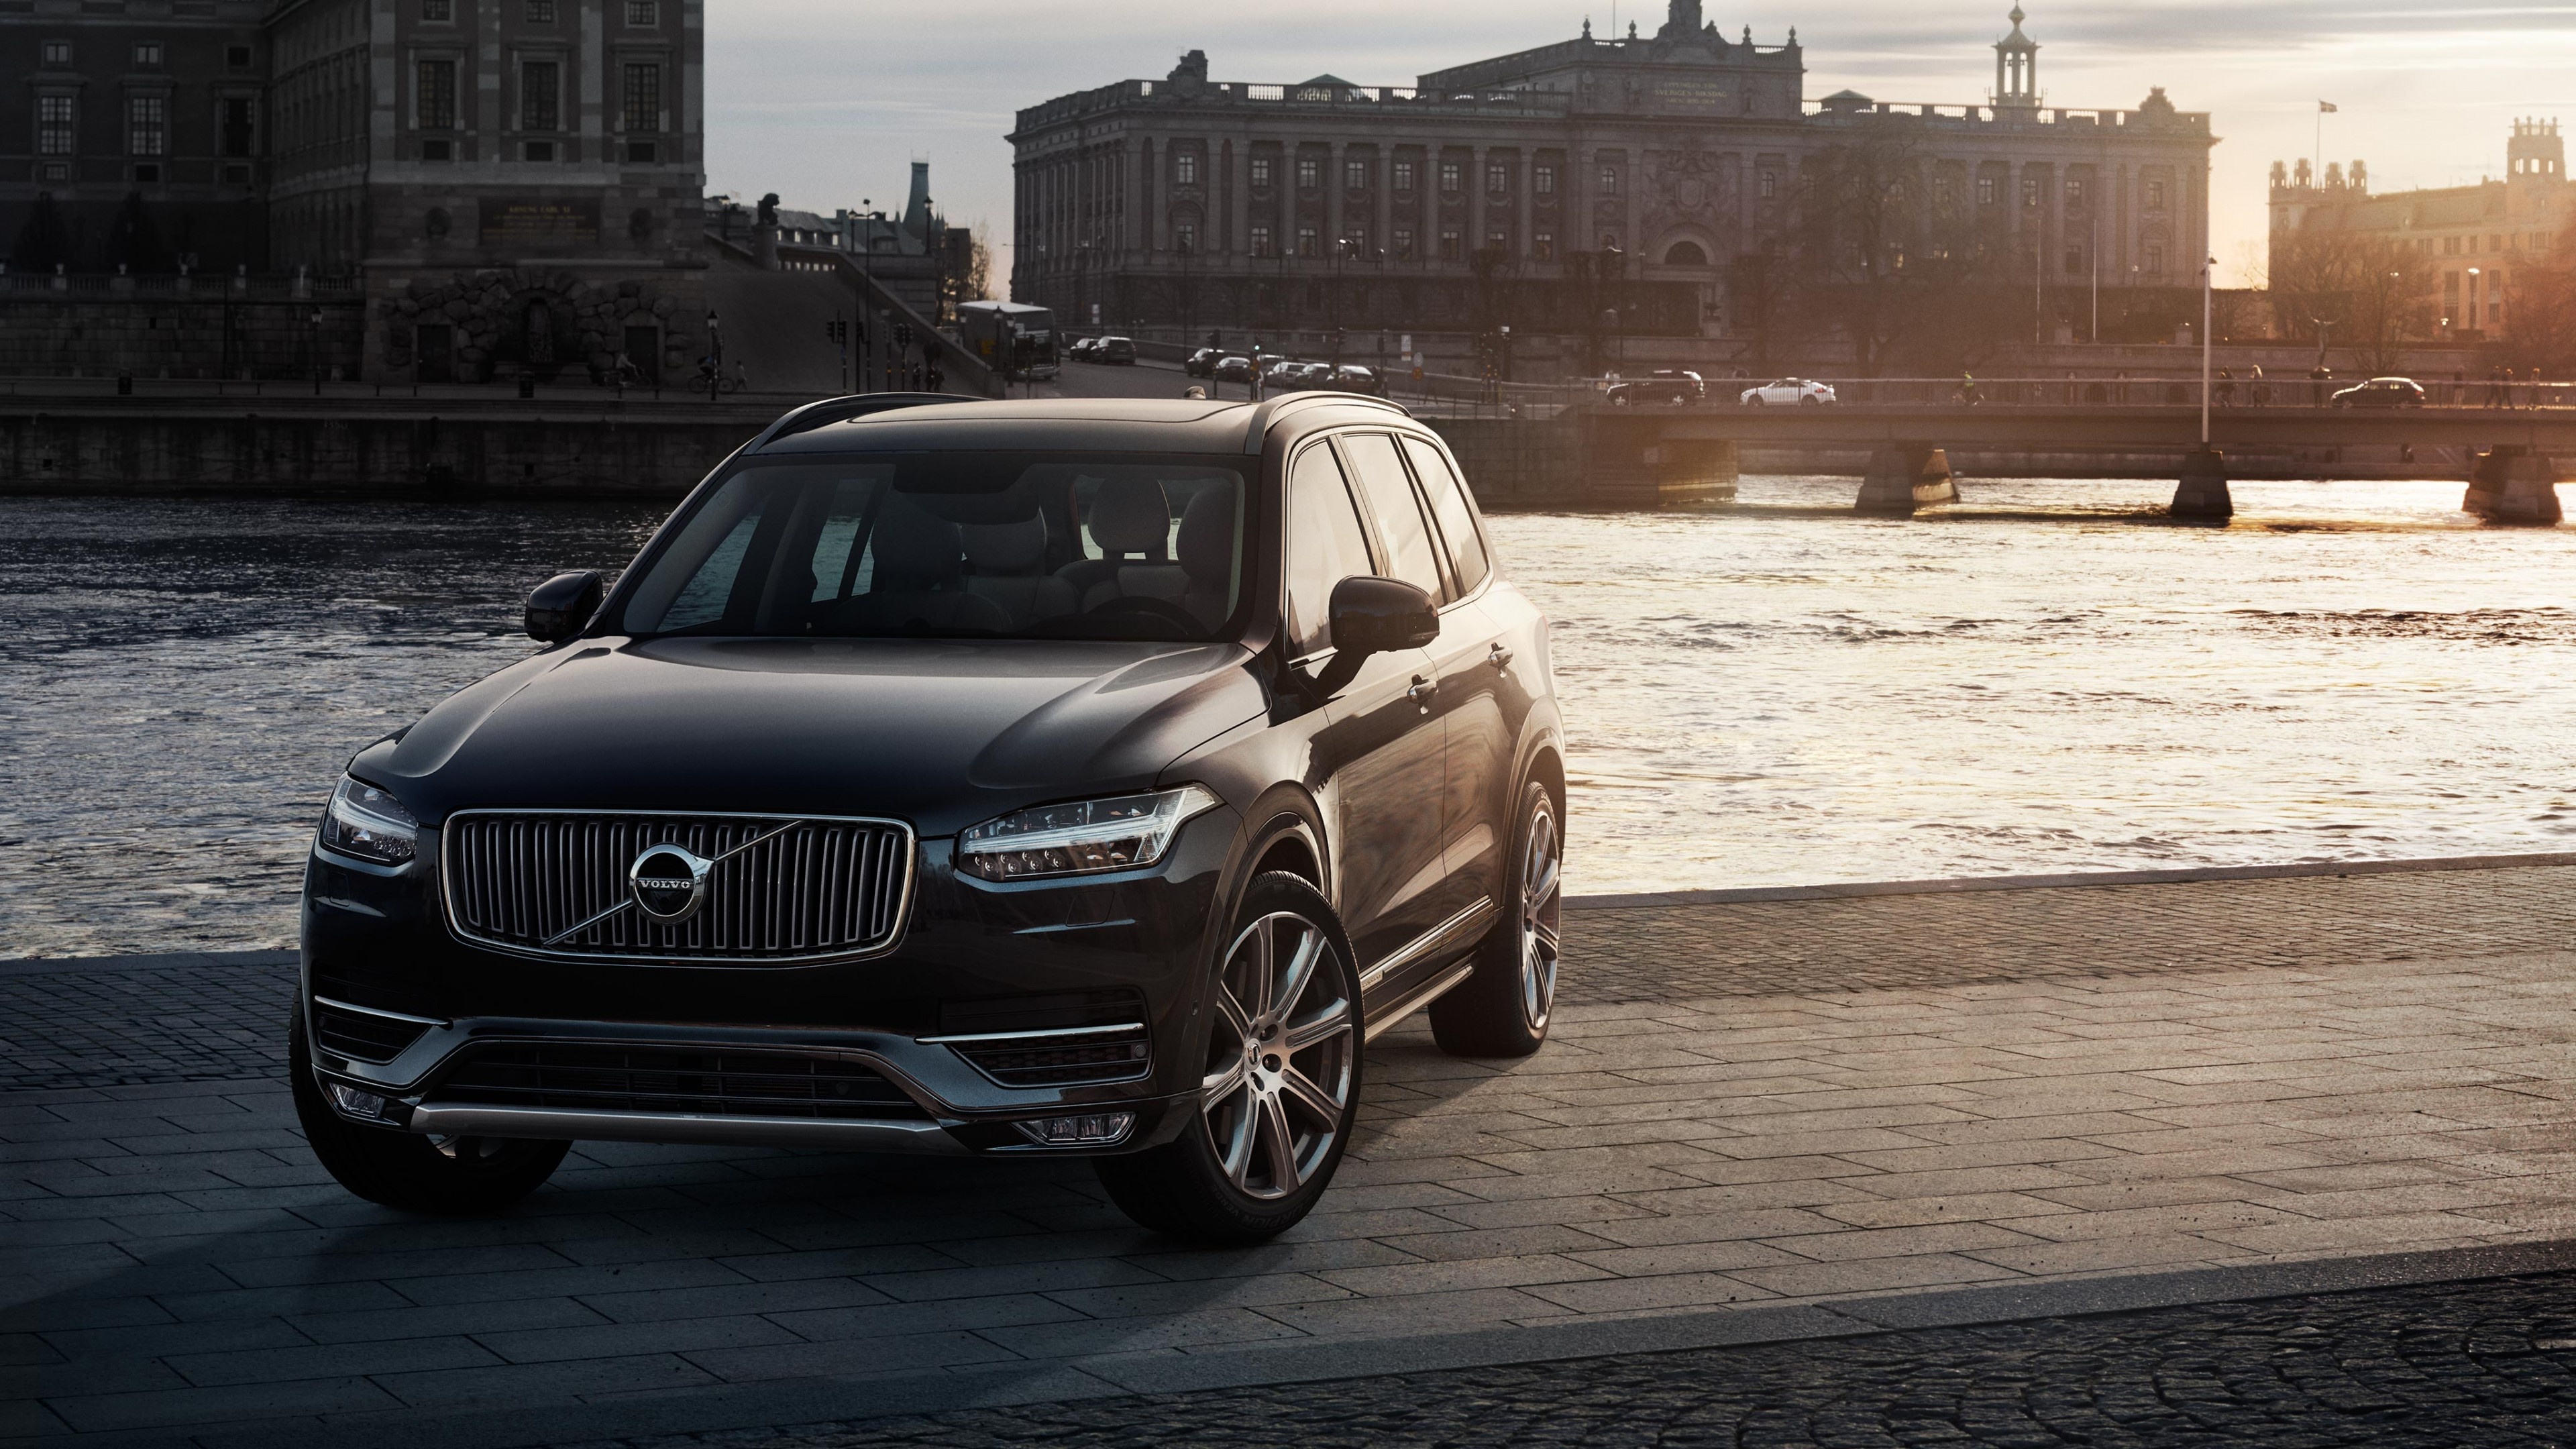 Volvo XC90, Captivating luxury, Front buy or rent, Unmatched reviews, 3840x2160 4K Desktop